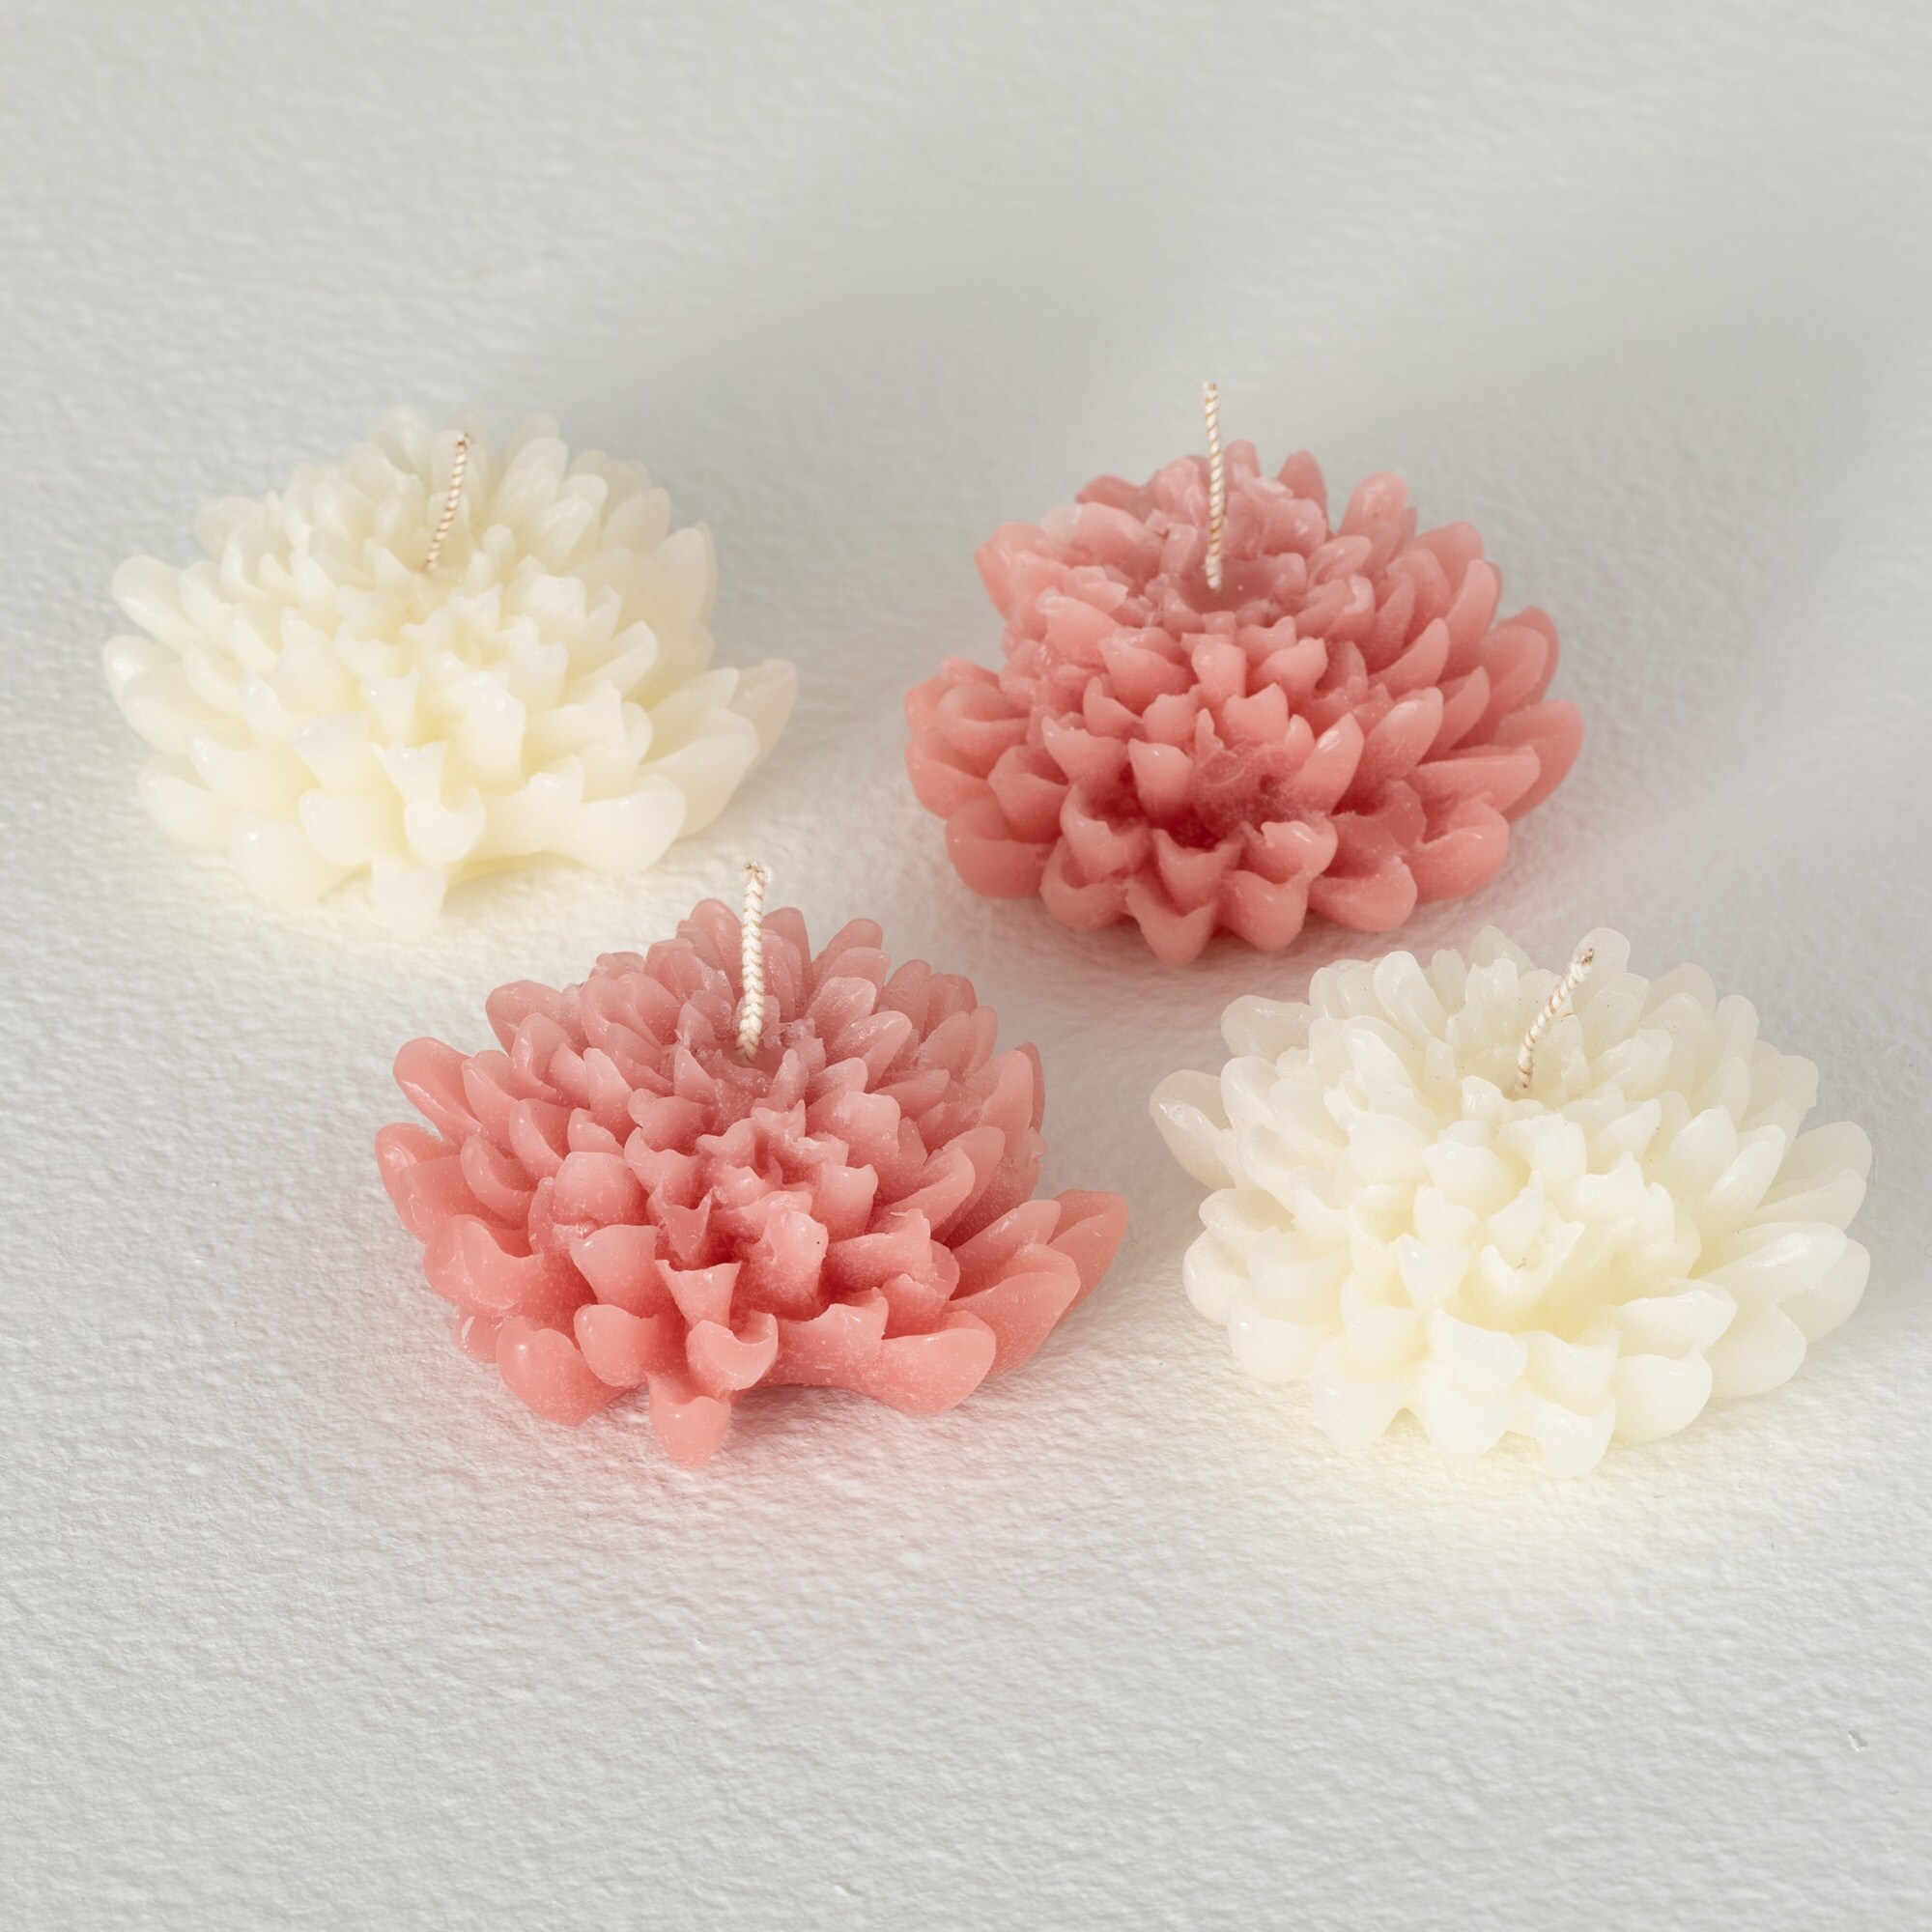 2"H Sullivans Blooming Flower Candle - Set of 4, Pink - 2.5"L x 2.5"W x 2"H